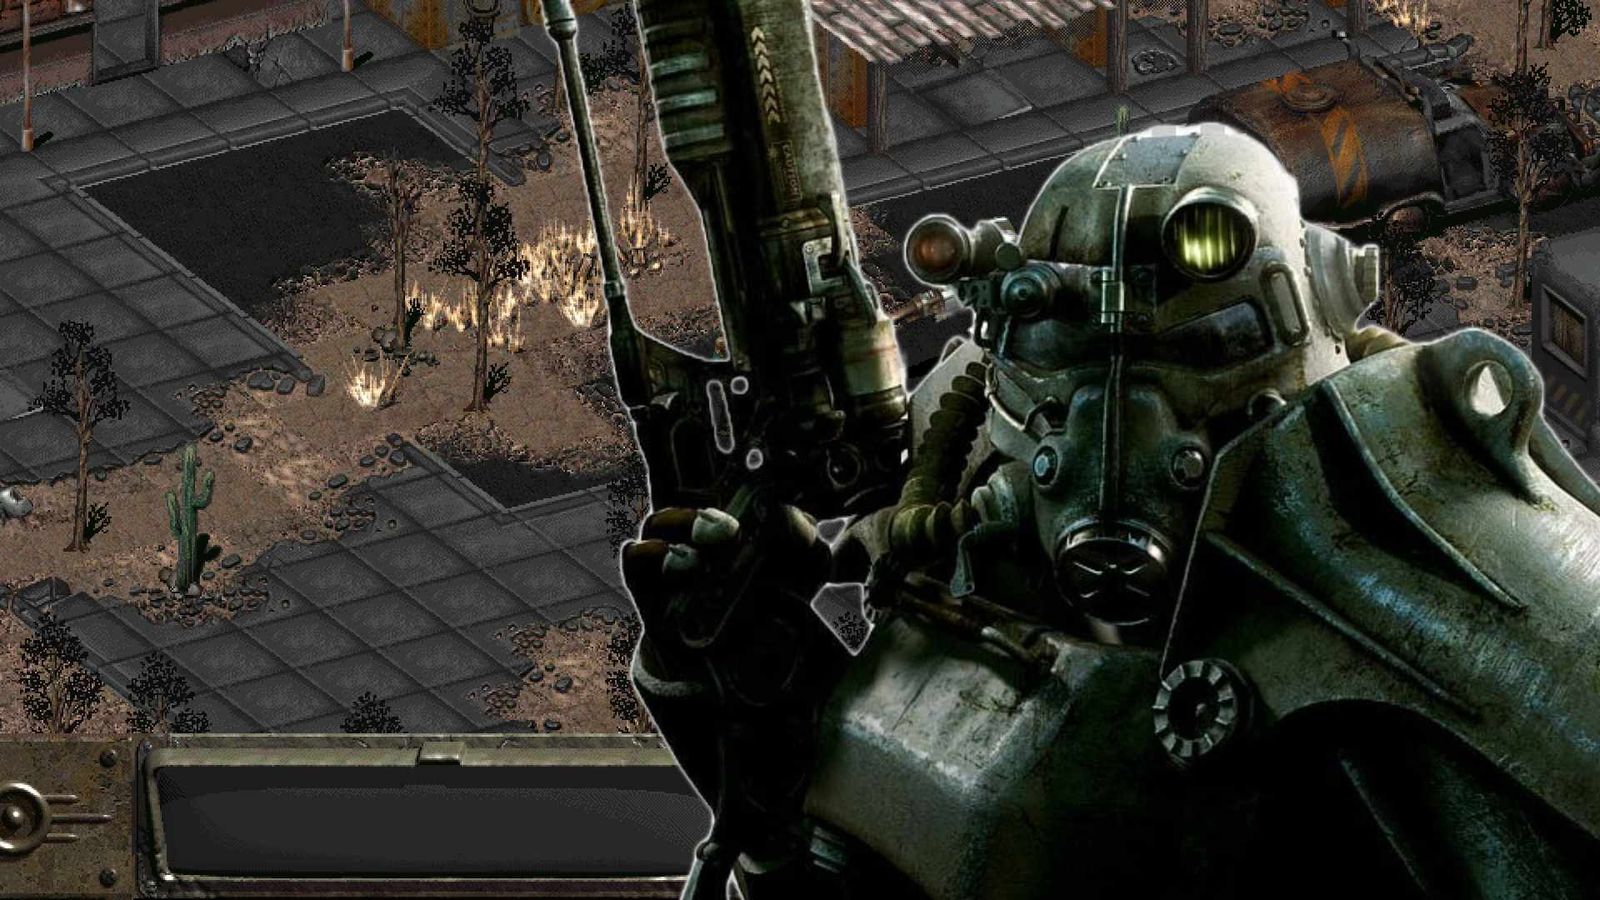 One of the power armors of Fallout 3 with a gun is shown while an older game is played in the background